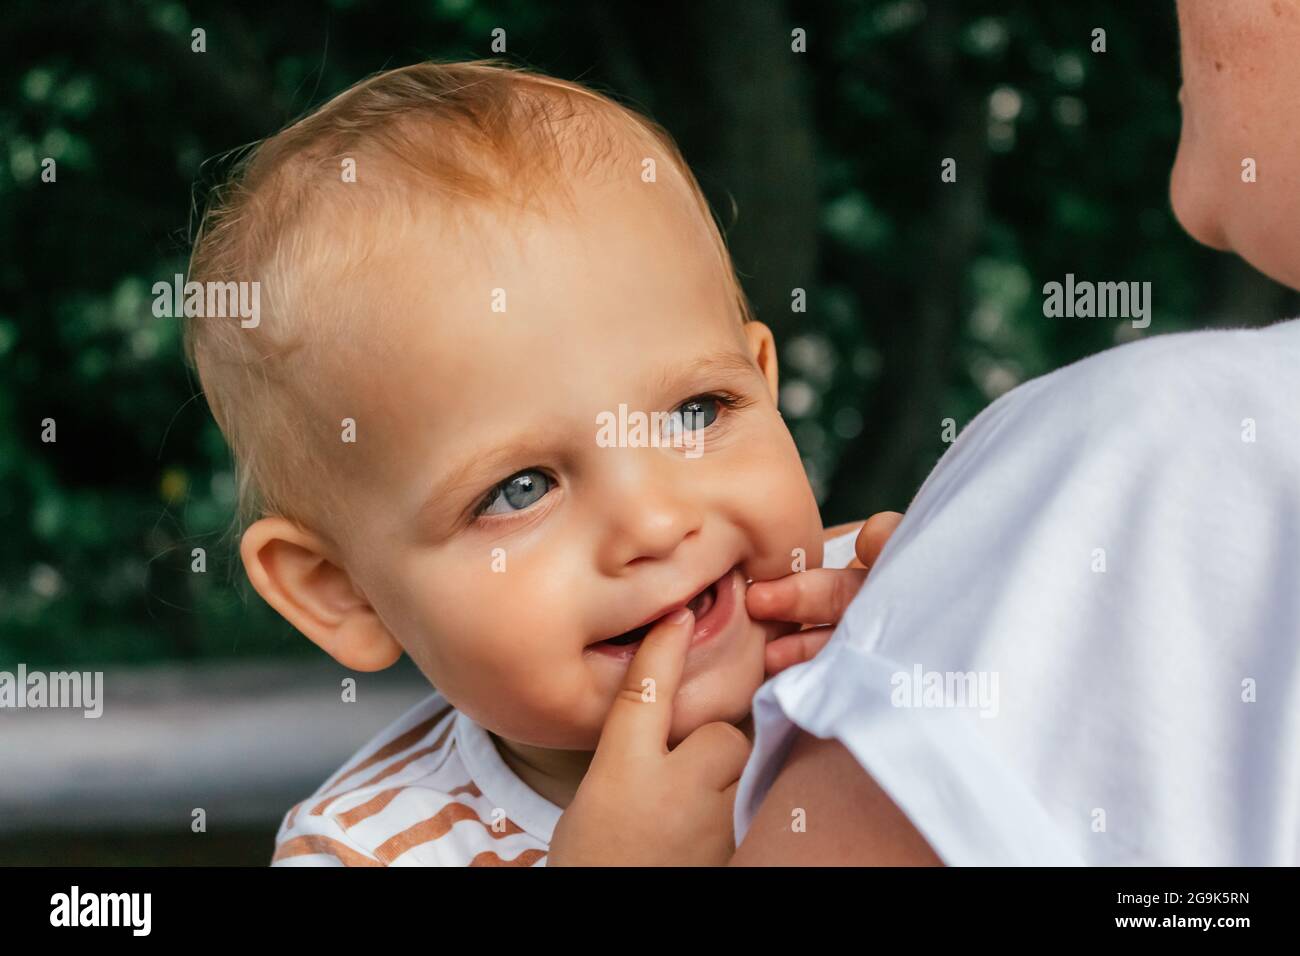 Little boy looks over his mother's shoulder. Stock Photo